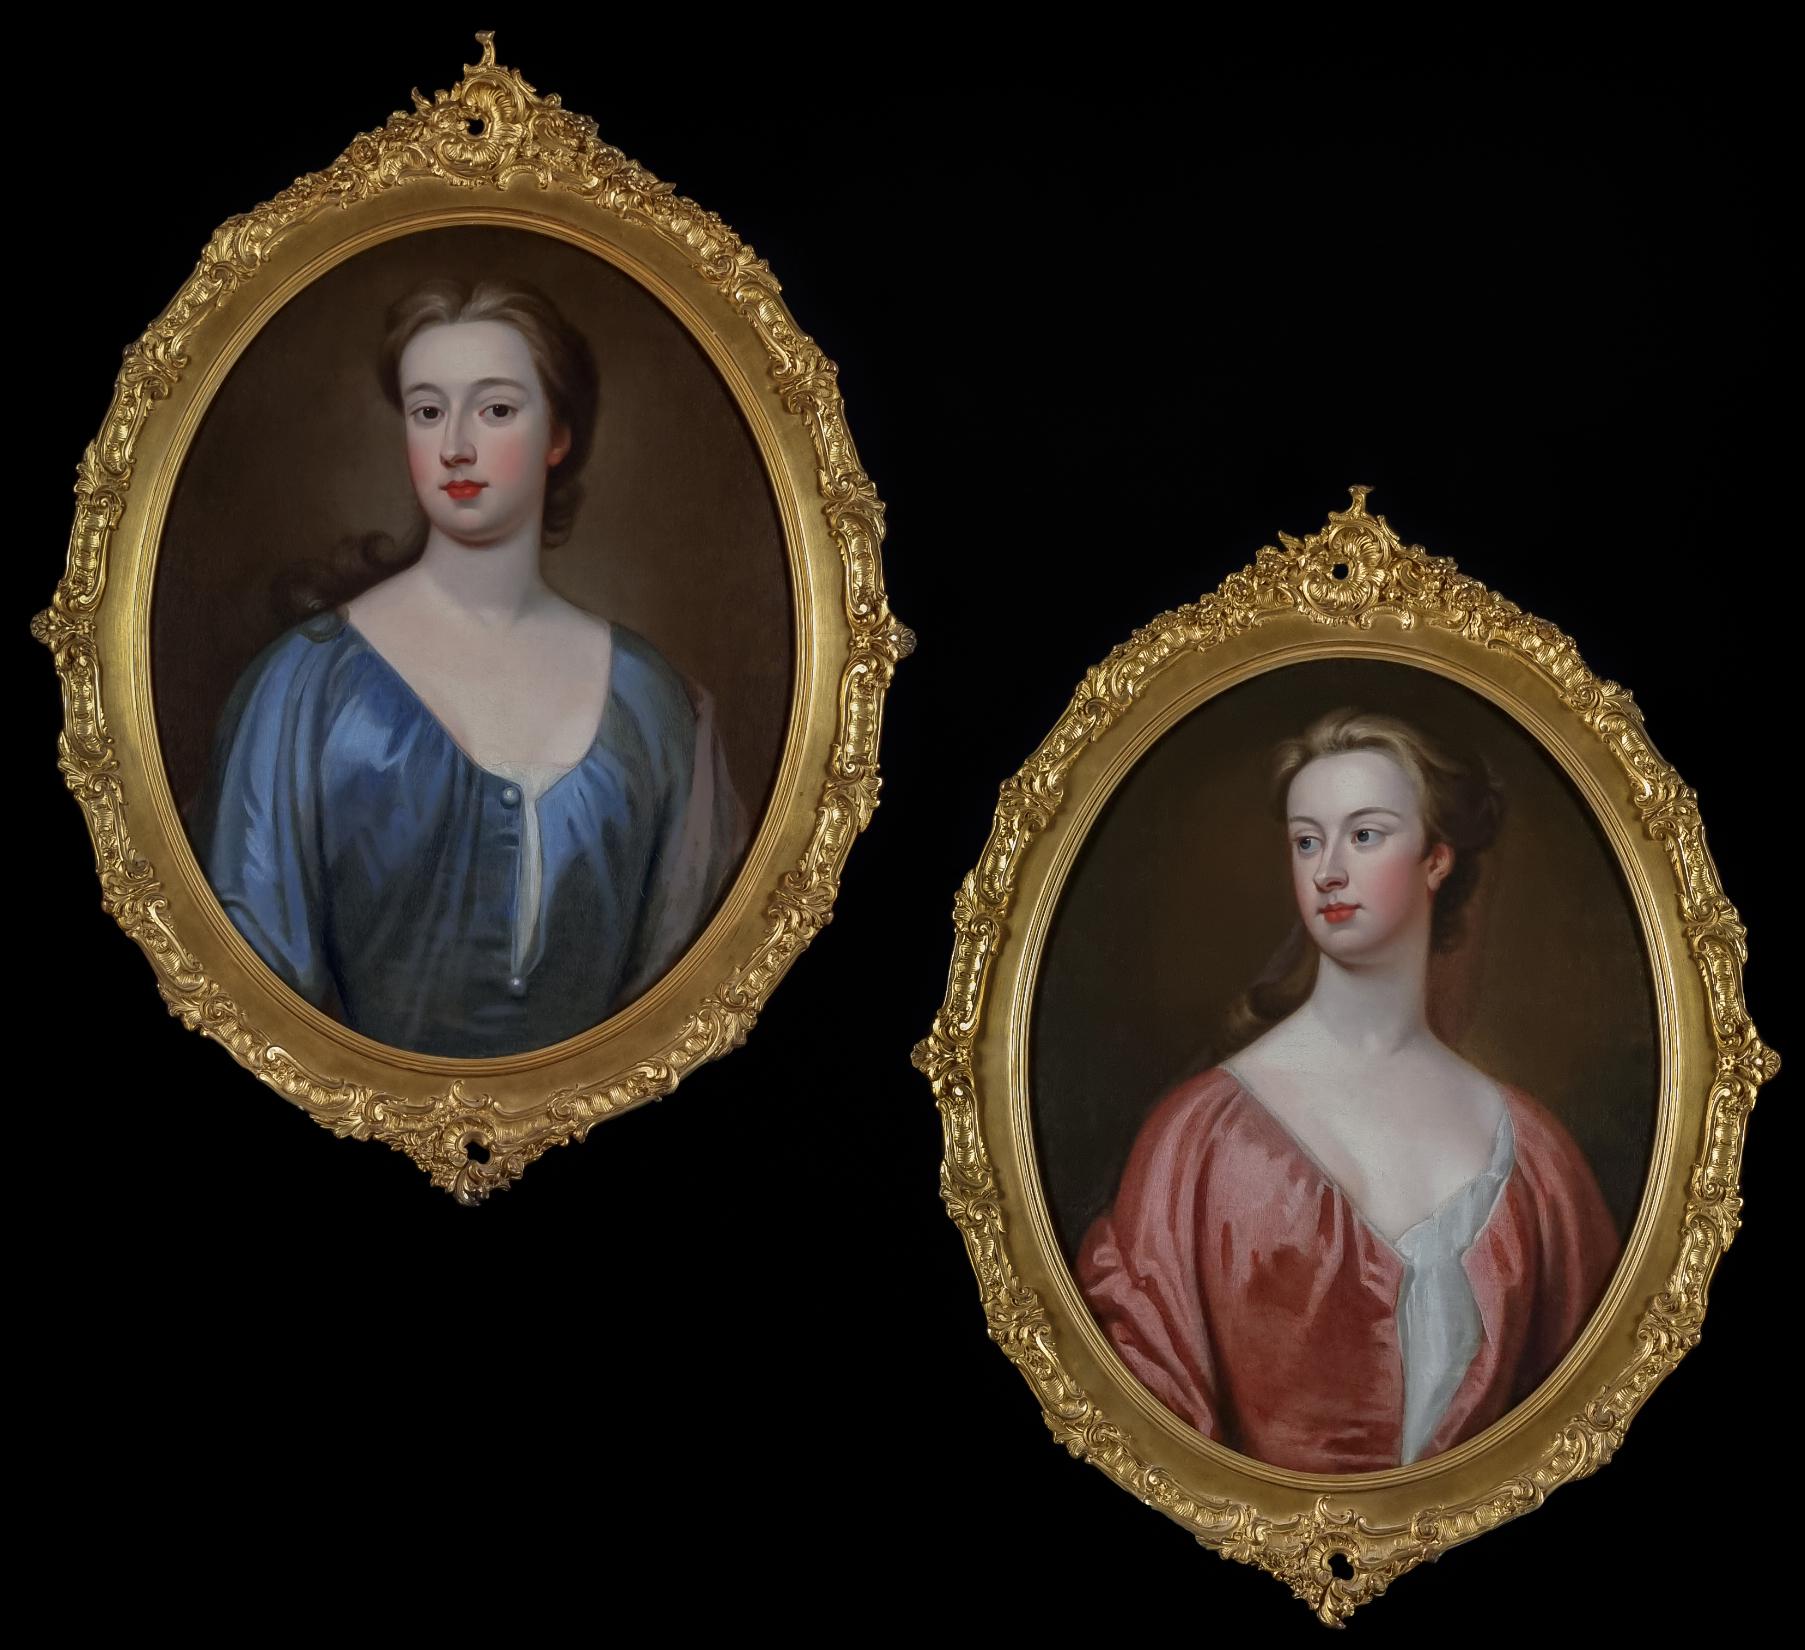 Pair (2) of English Portraits, Lady in Blue Dress & Lady in Red Dress c.1720